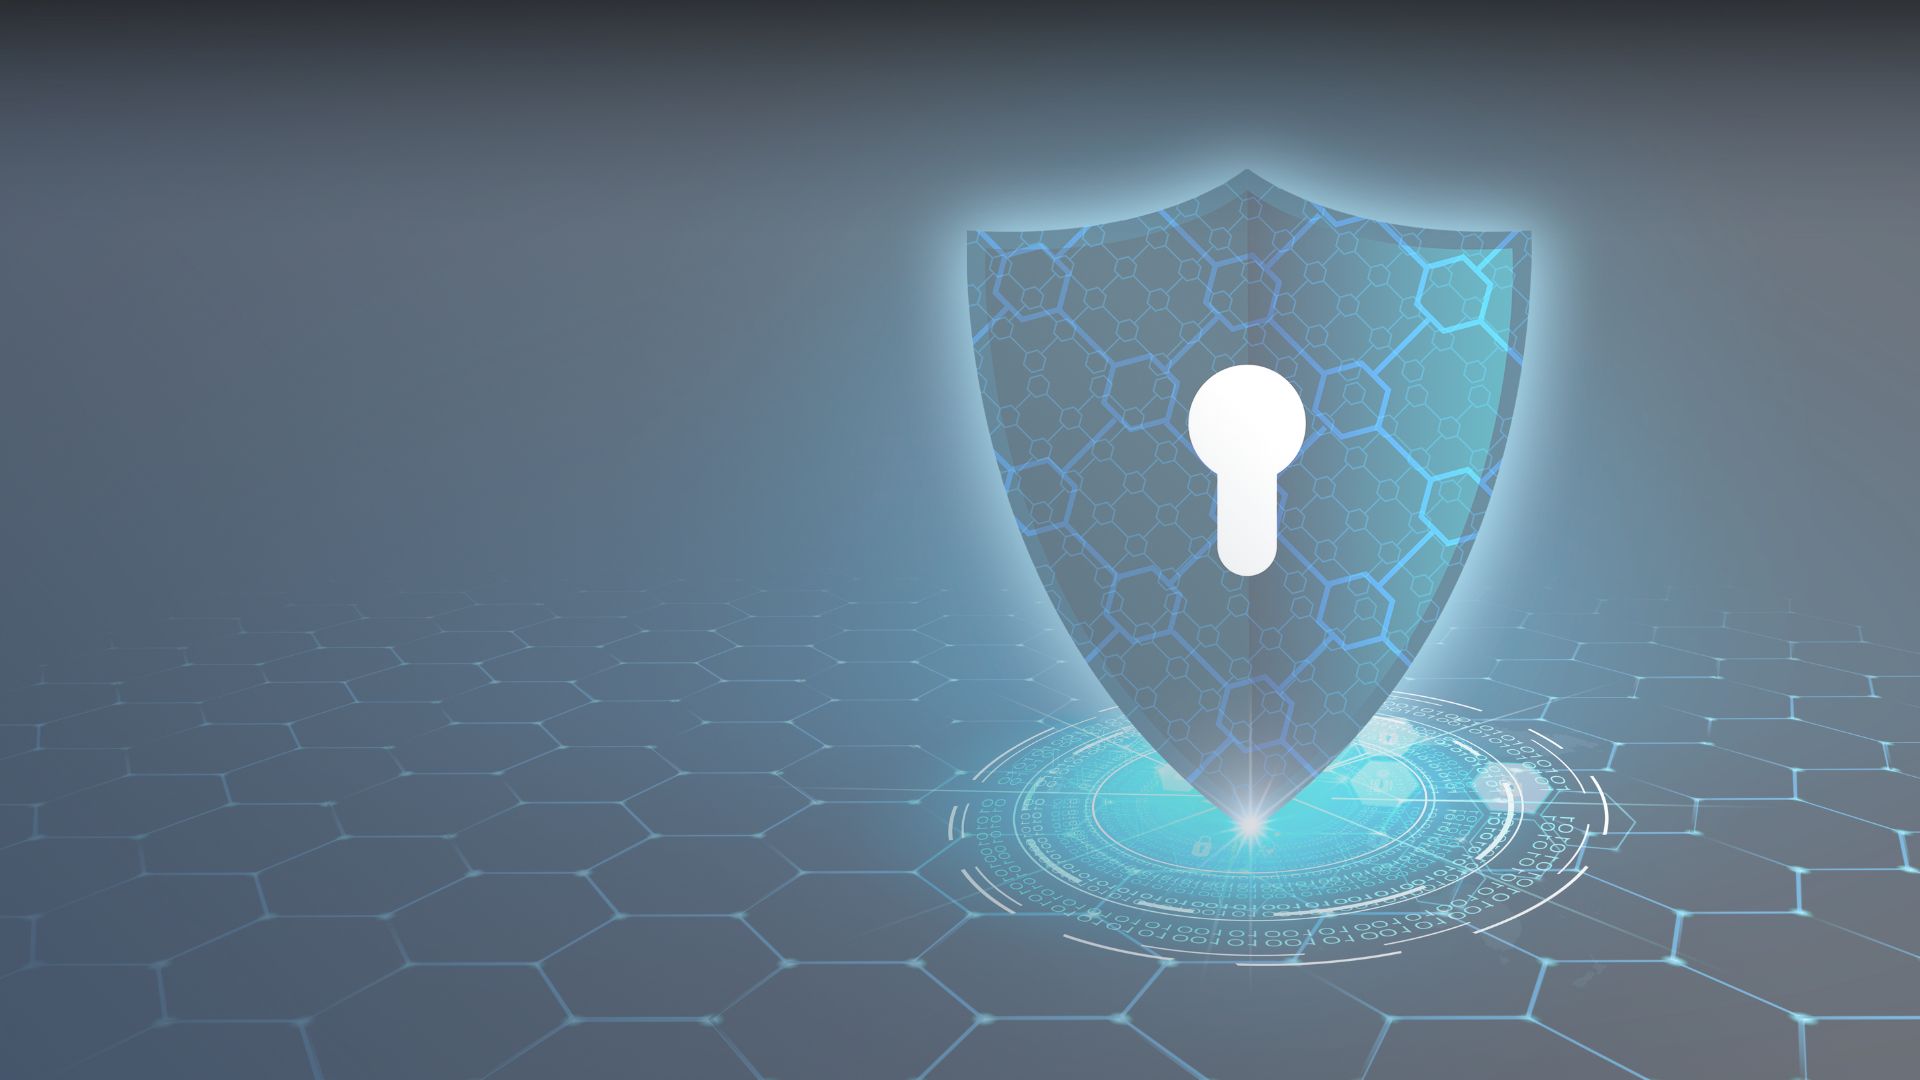 Image of a security shield 